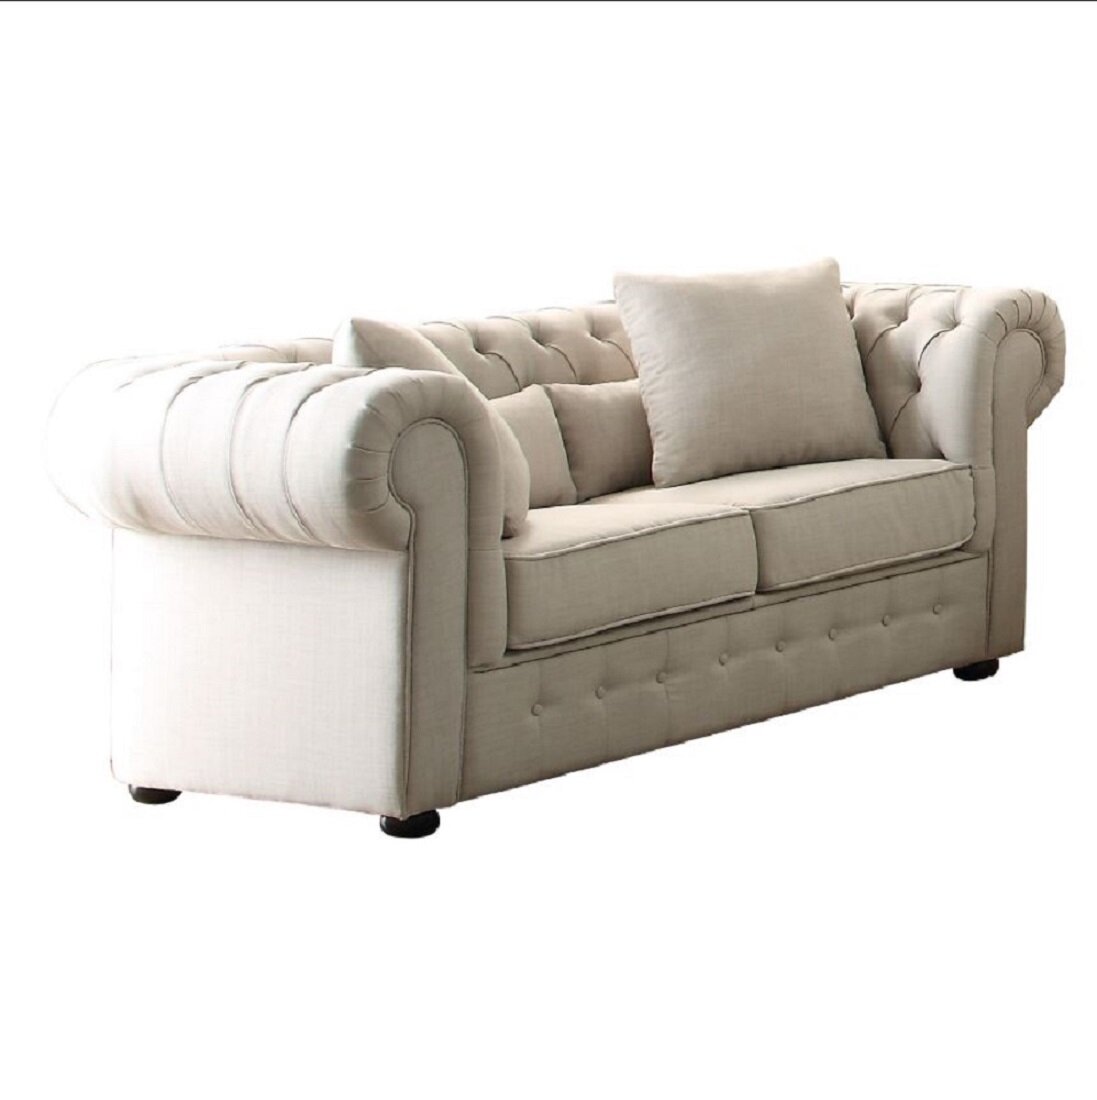 Zaffelare 74.75” Chesterfield Loveseat with Reversible Cushions